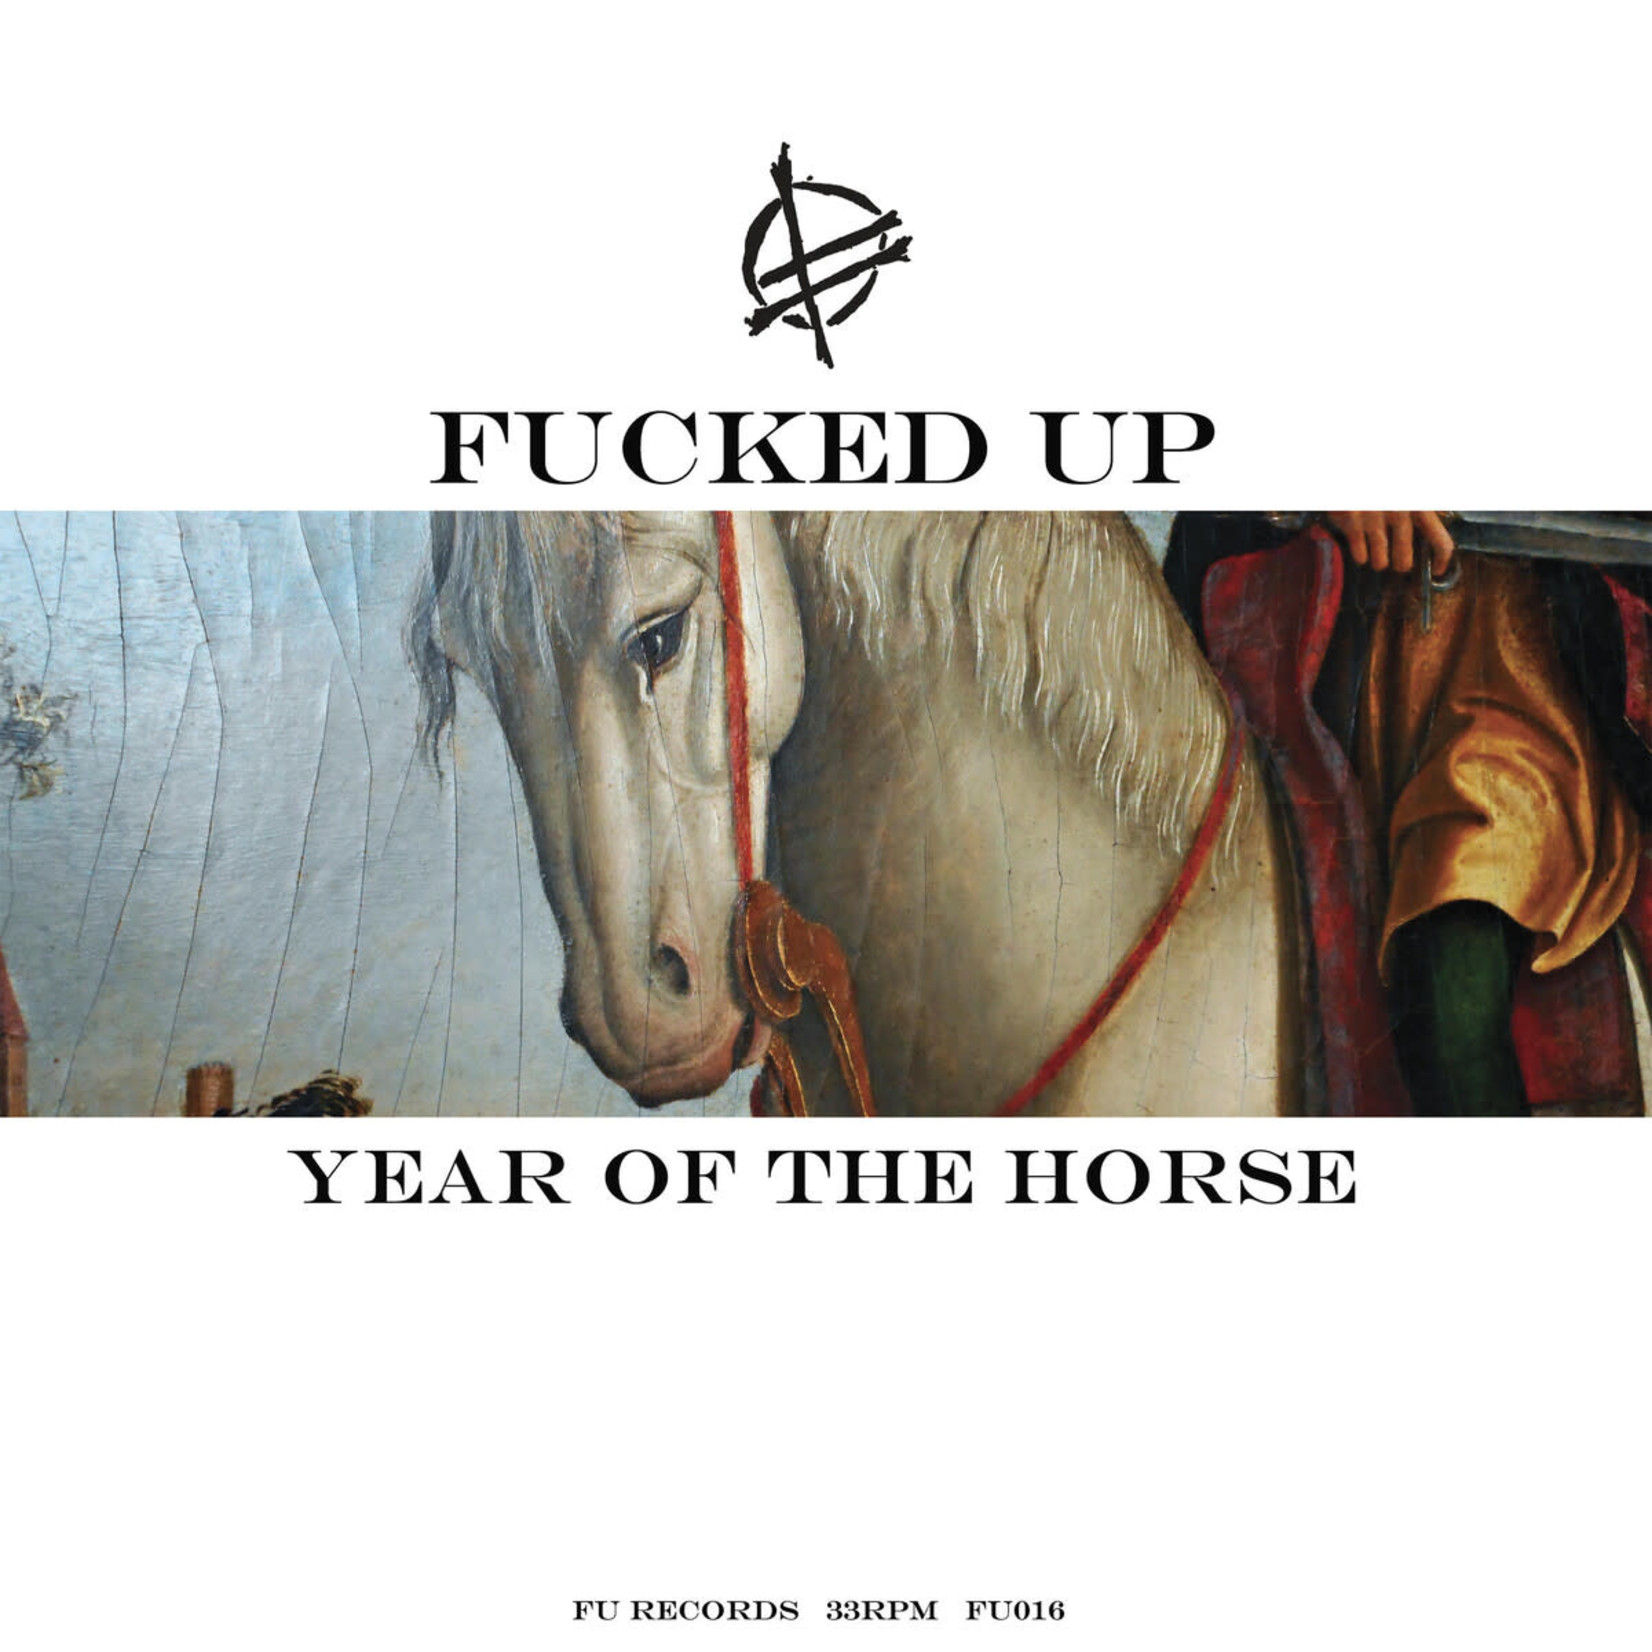 [New] Fucked Up: Year Of The Horse (2LP) [TANKCRIMES]